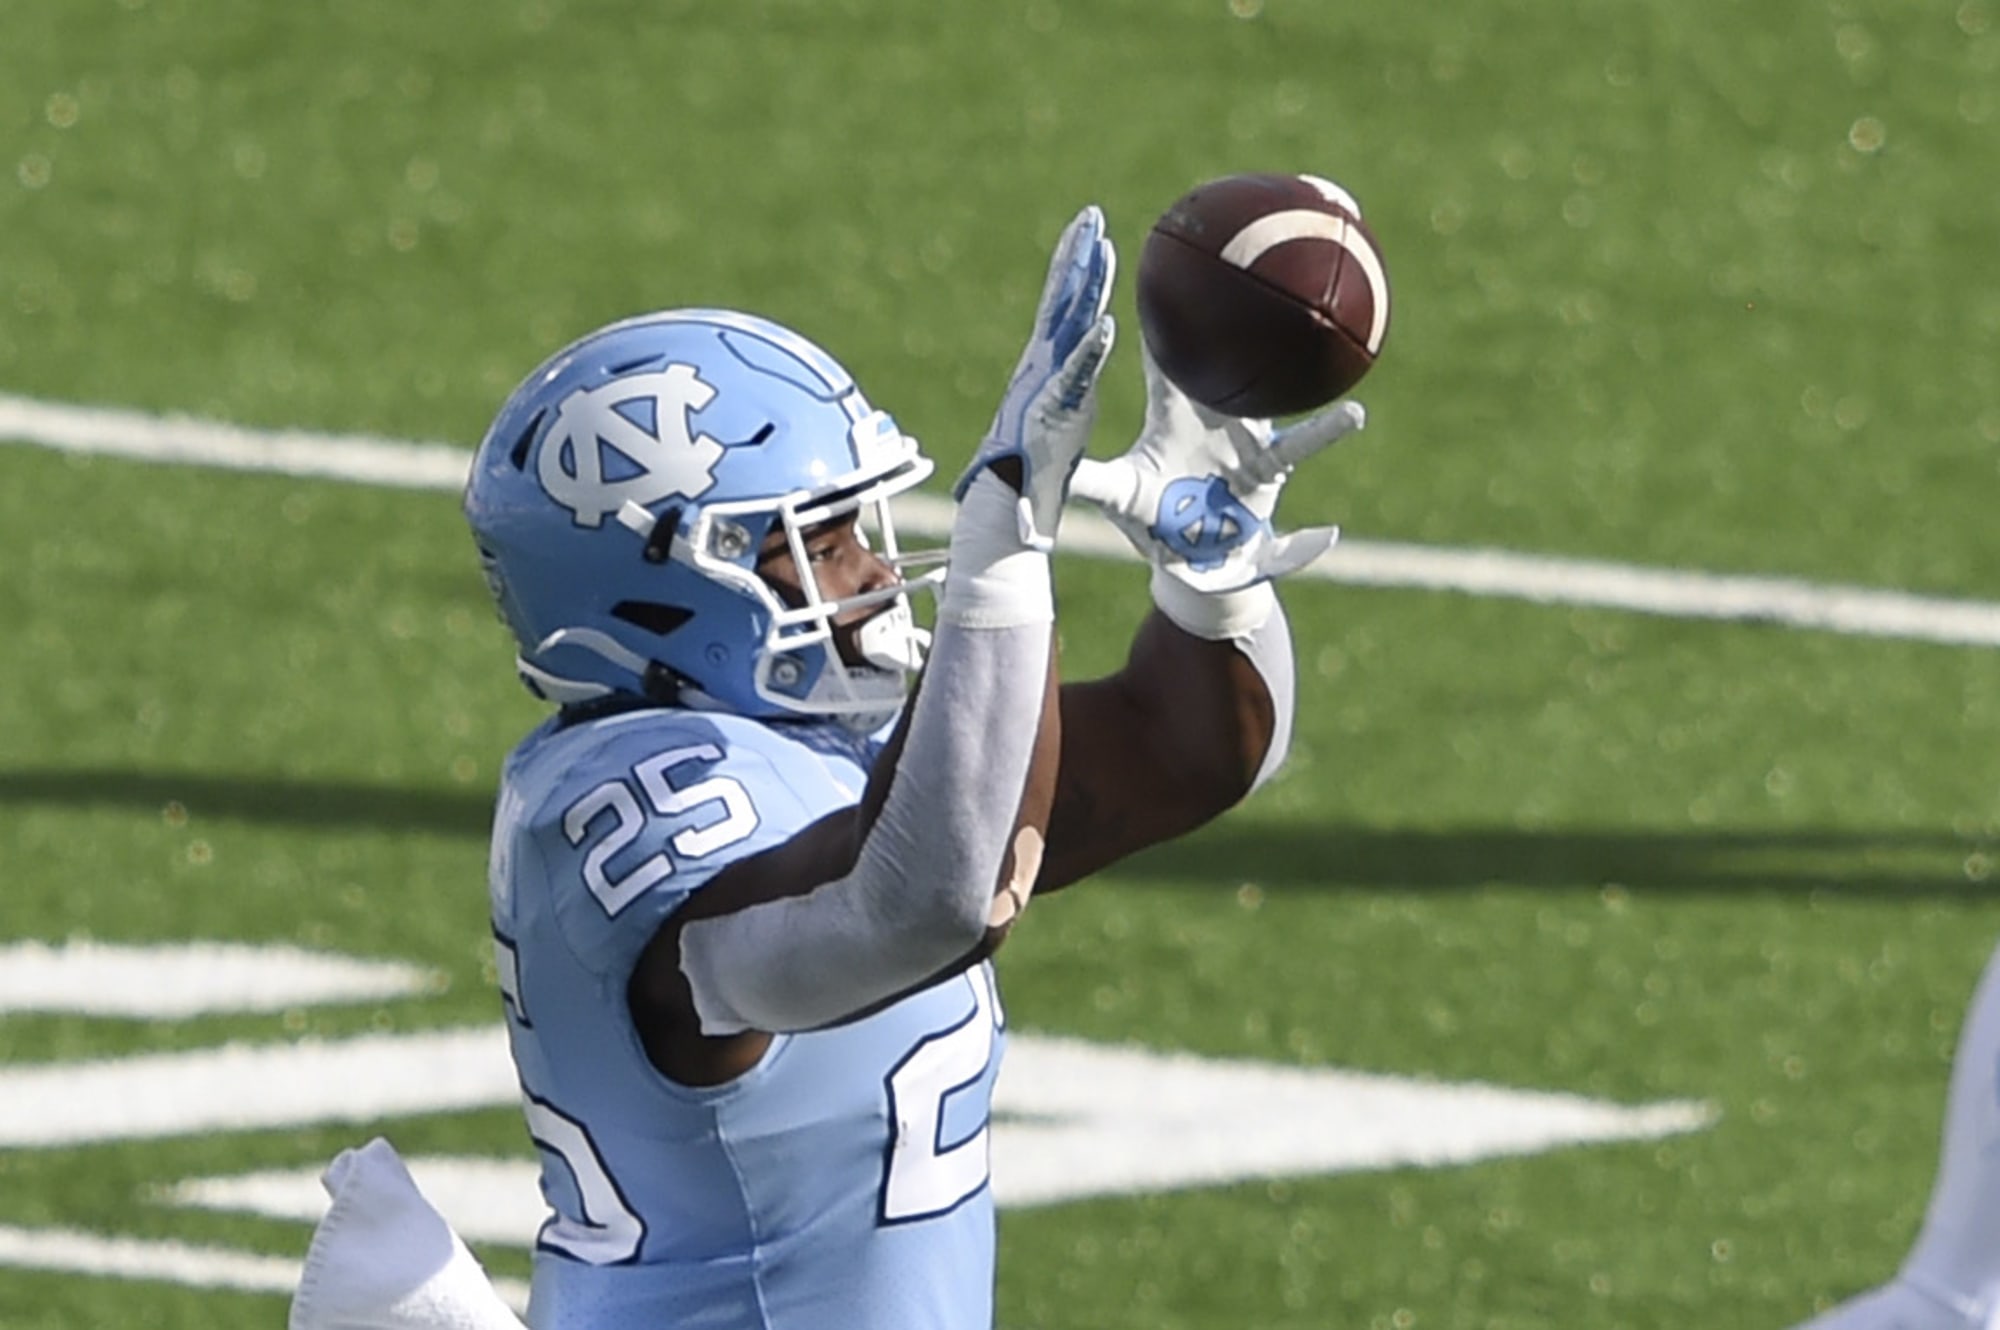 2021 NFL Draft Comps: North Carolina RB Javonte Williams can break into a  dominant role in the NFL, NFL Draft